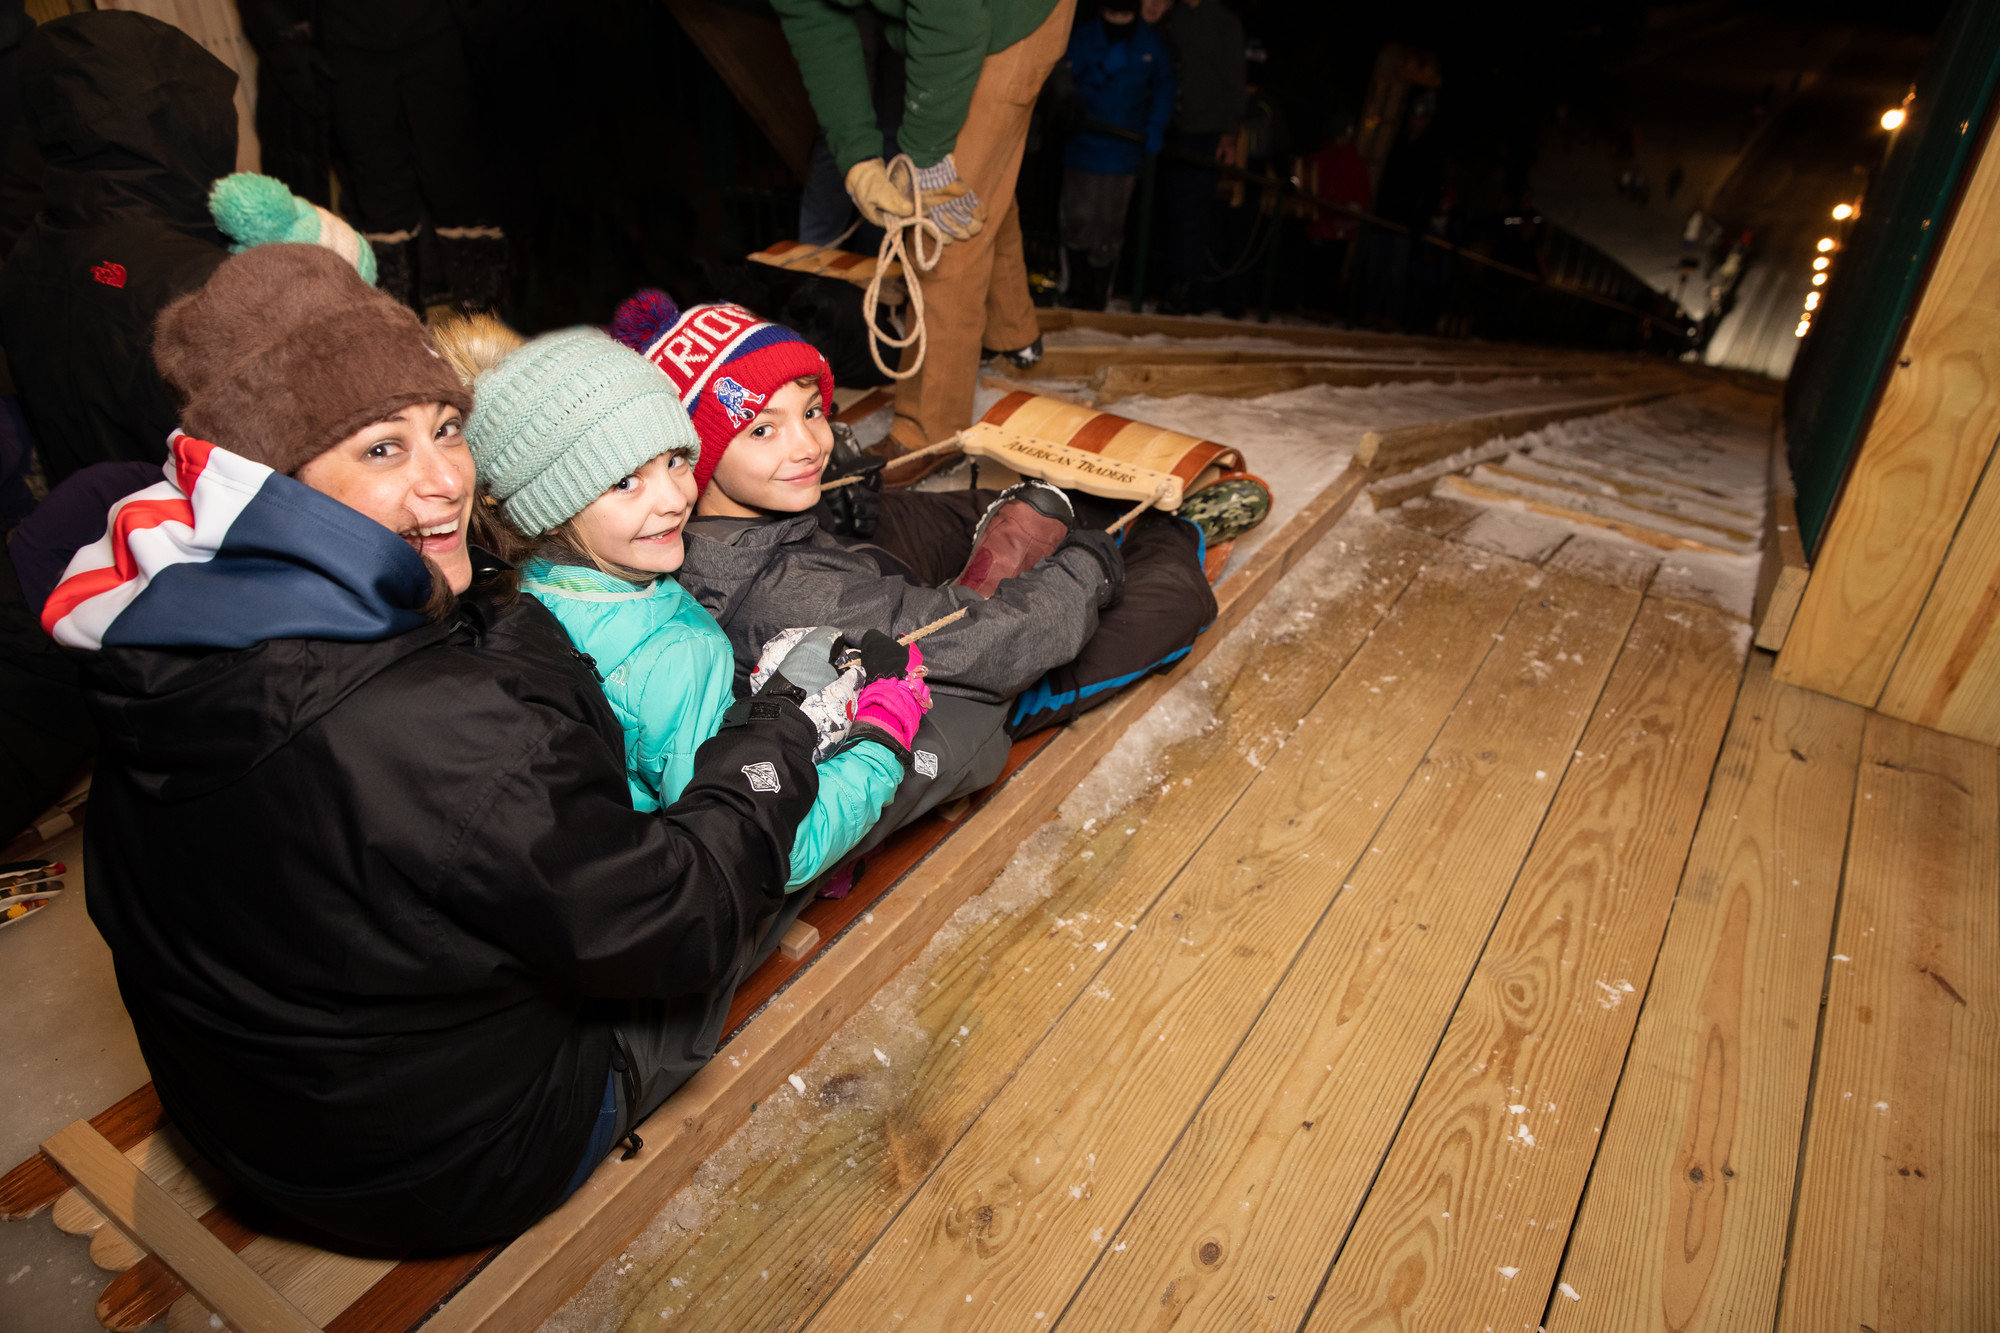 A woman and two children prepare to slide down the toboggan chute.